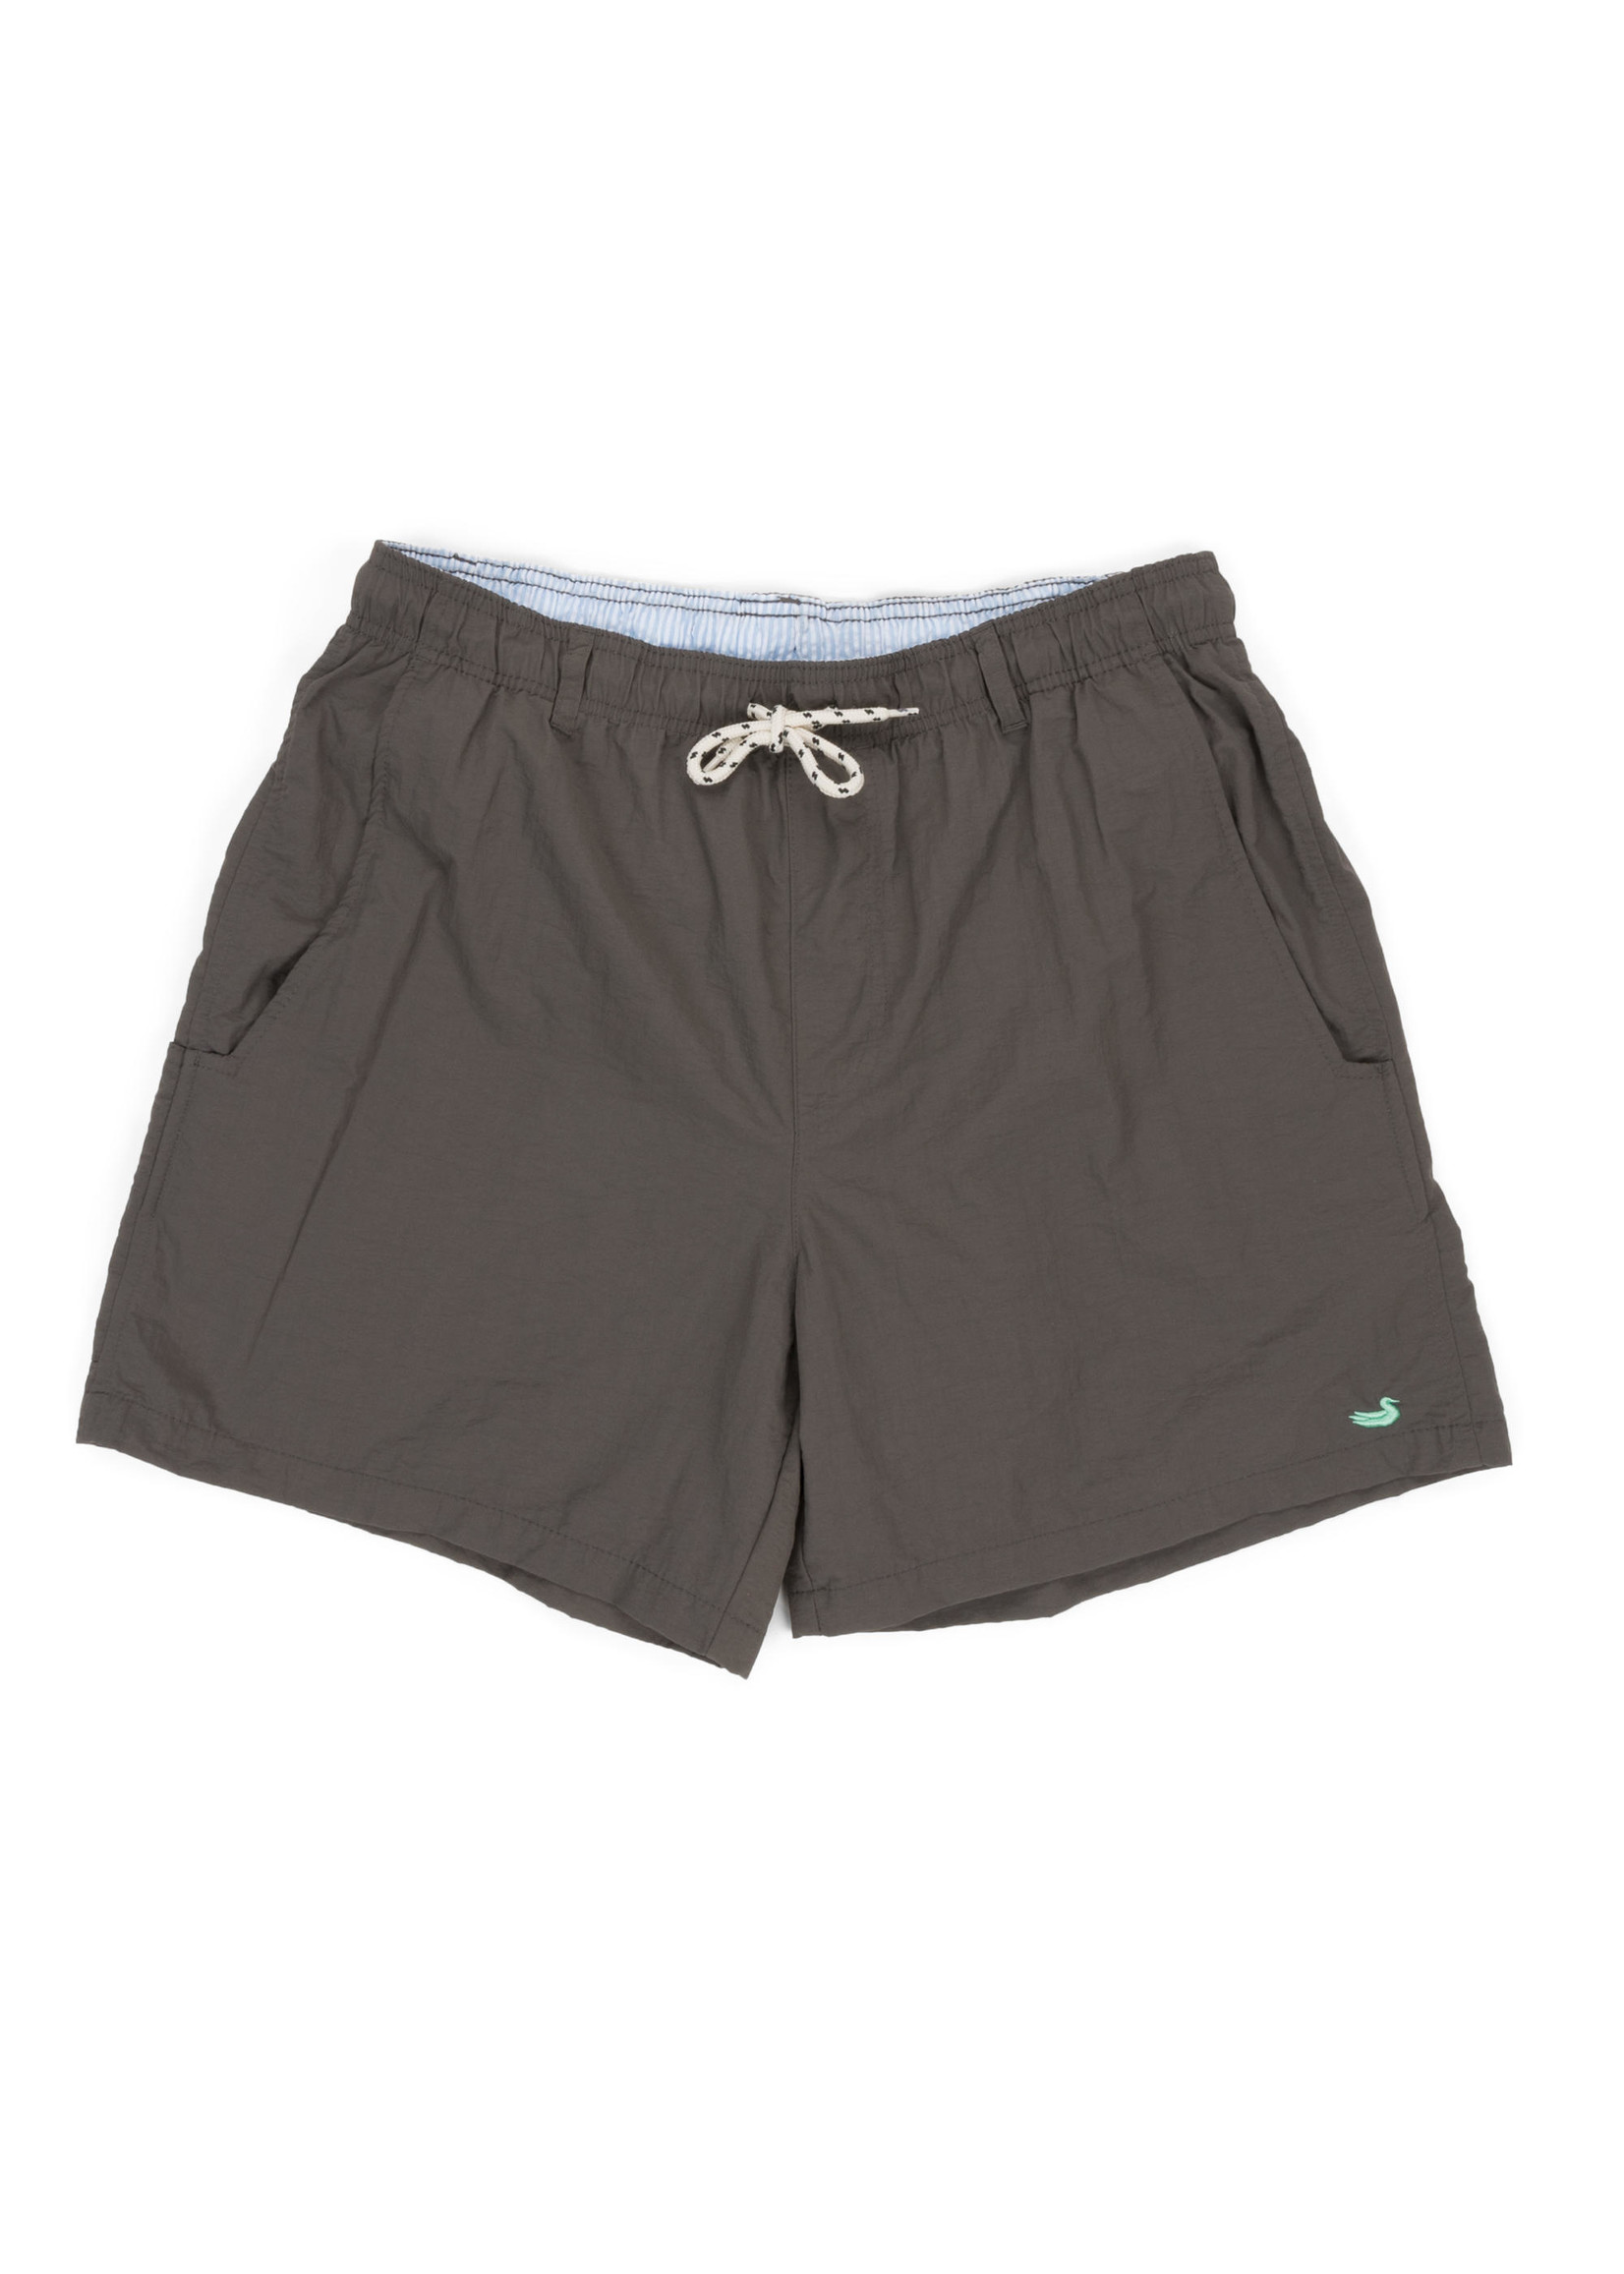 Southern Marsh The Dockside Swim Trunk - Solid